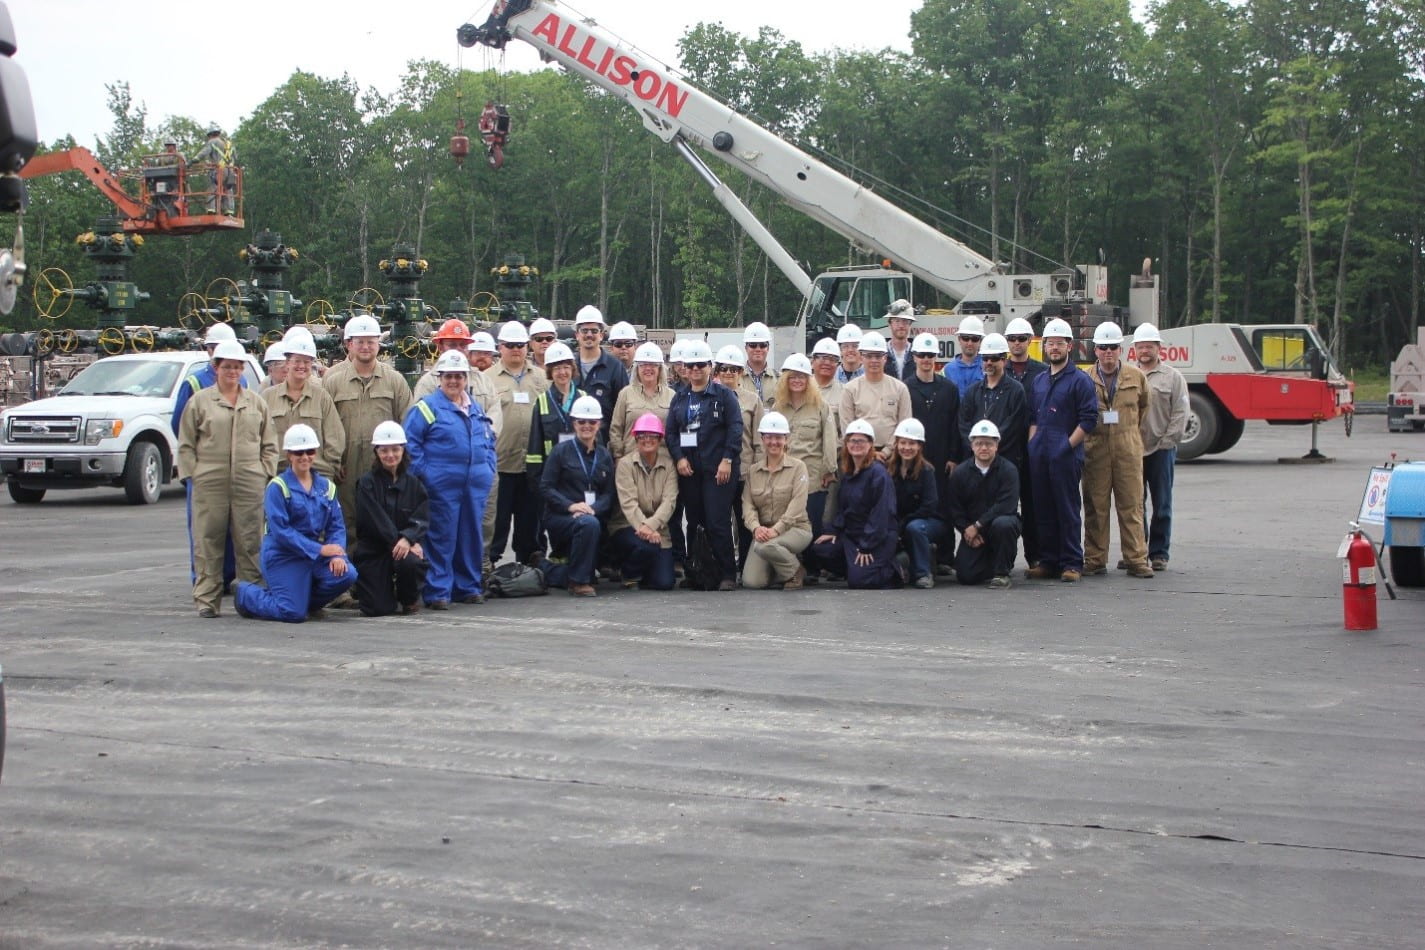 A group of people in a TOPCORP training class on a shale gas drilling pad. Credit: Penn State MCOR